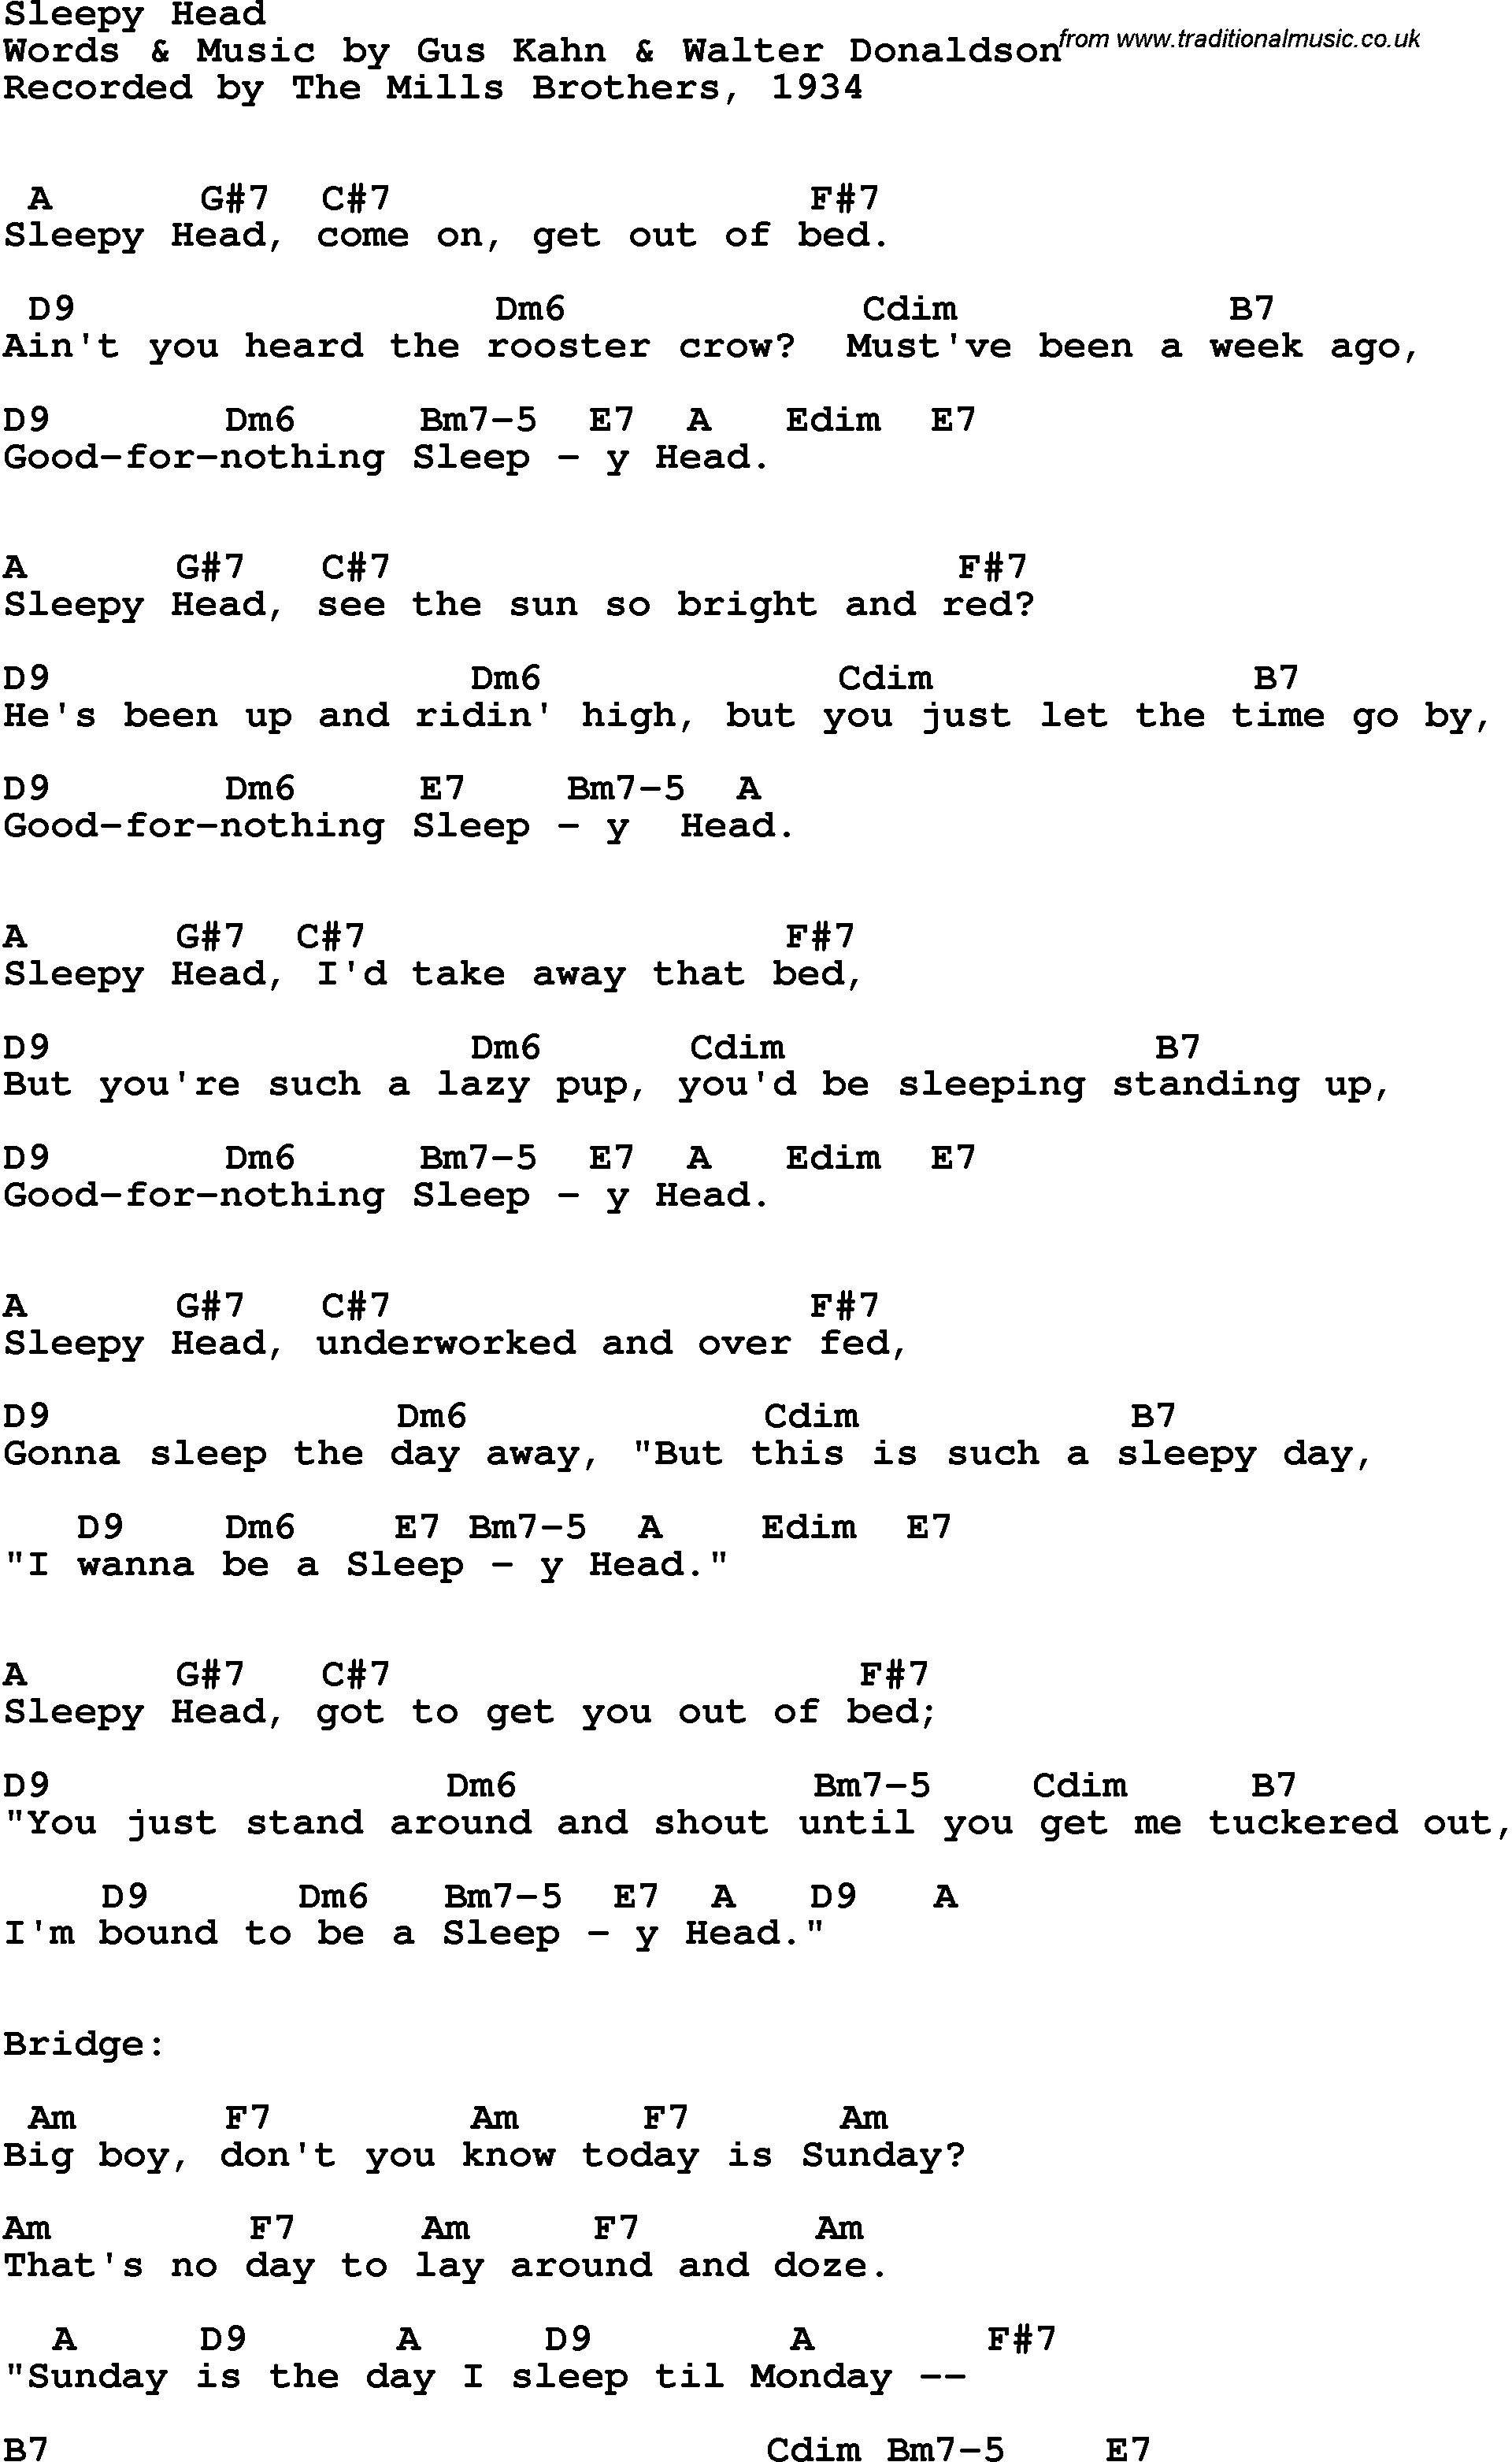 Song Lyrics with guitar chords for Sleepy Head - The Mills Brothers, 1934